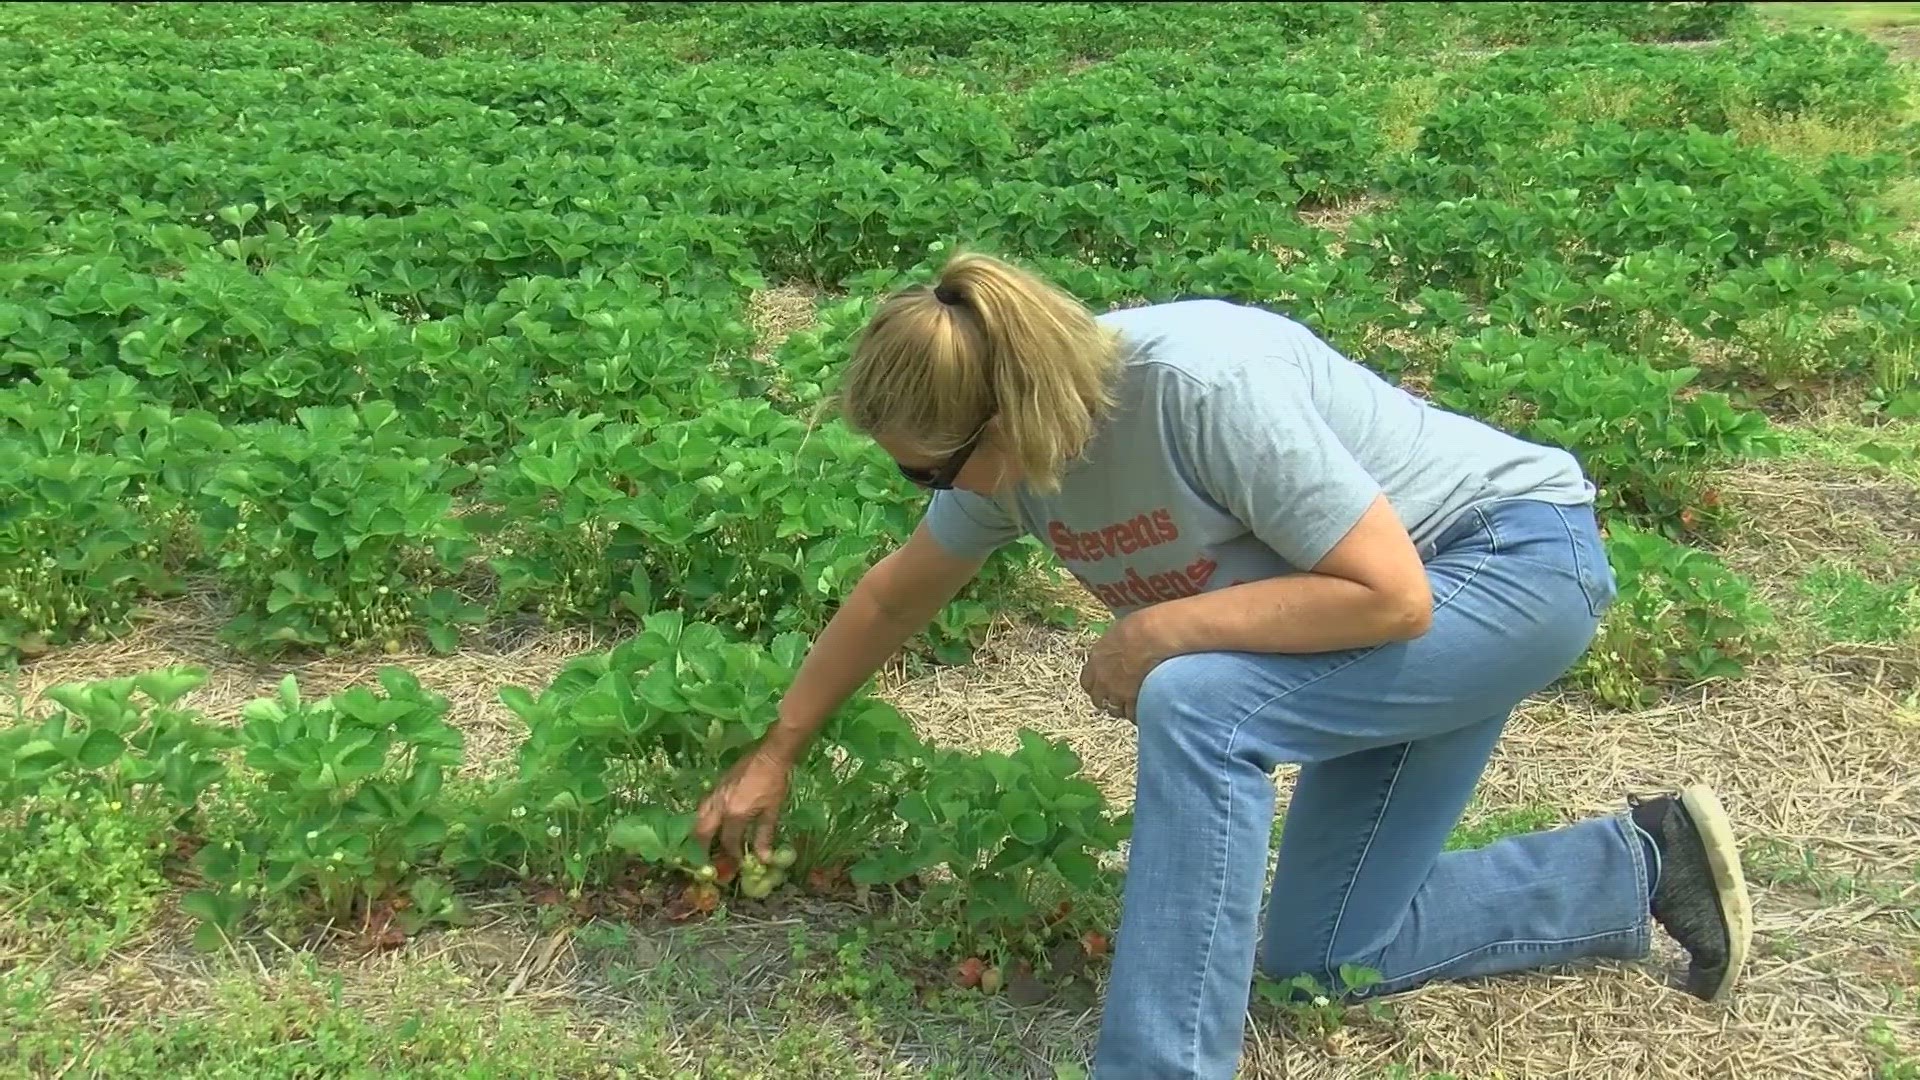 As the dry spell drags on, northwest Ohio is approaching the spring record of 19 days without rain set in 1988. Farmers across the area are feeling the heat.